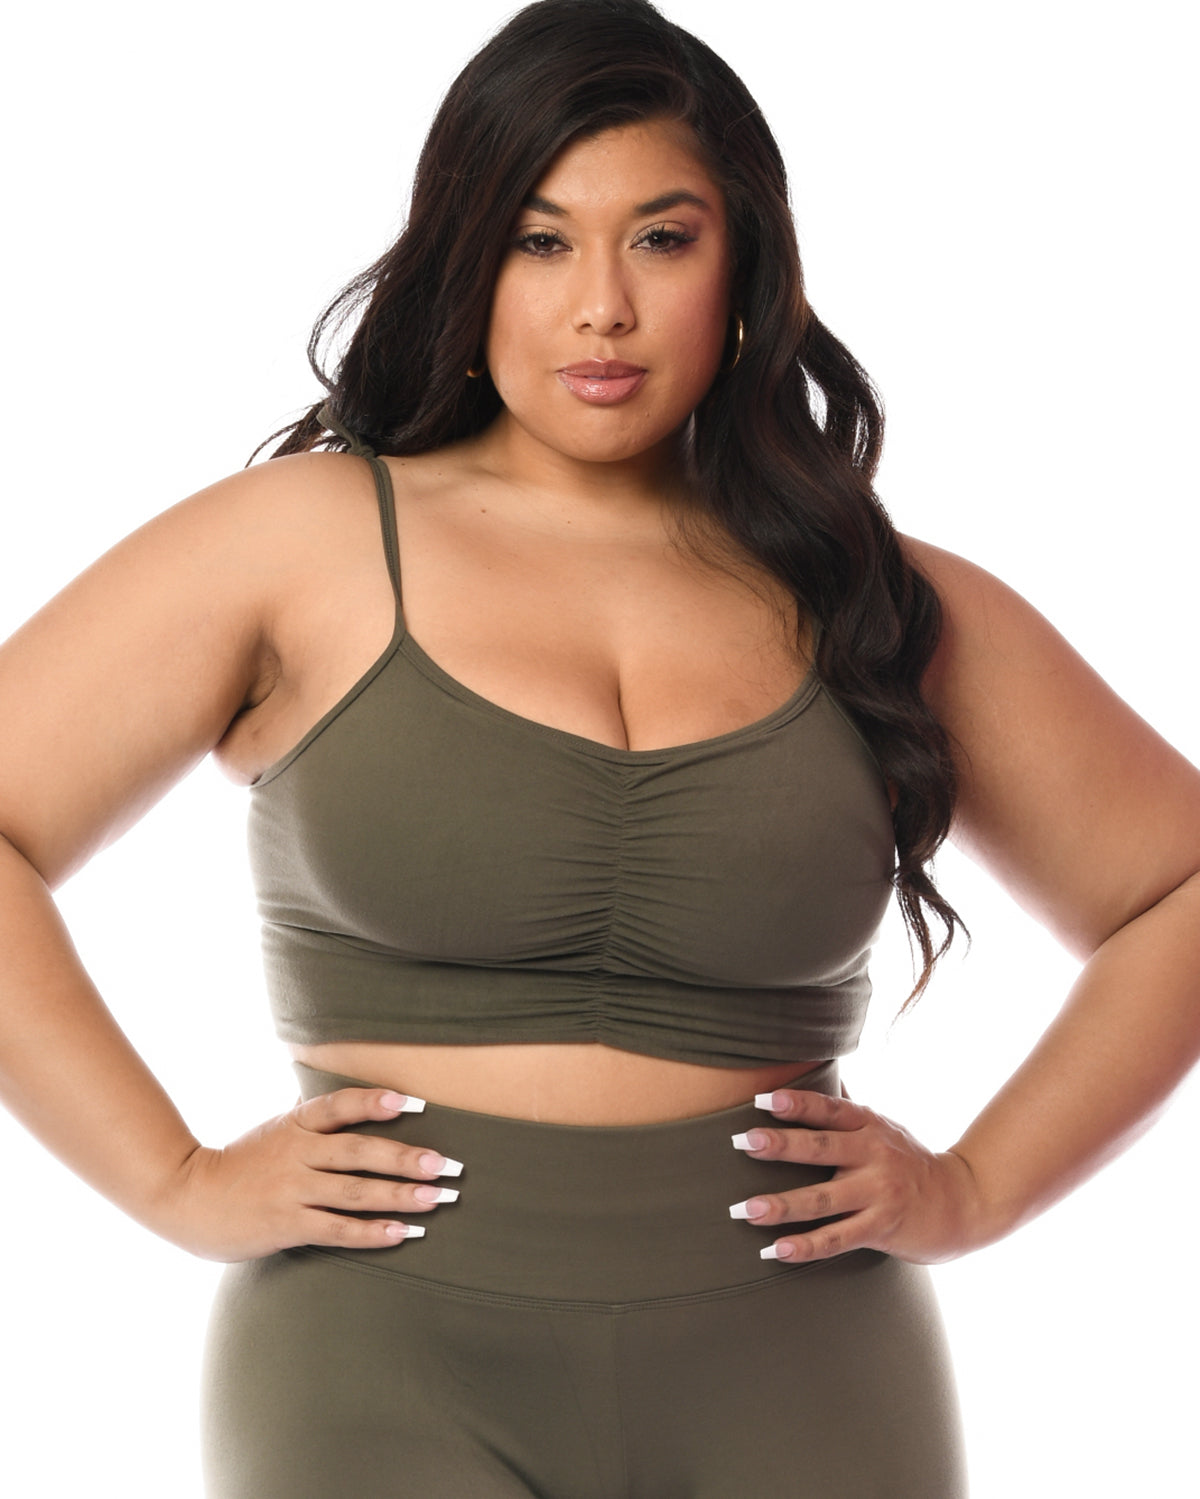 *Nudey Booty* (Lifestyle Cami Sports Bra) by Cute Booty Lounge